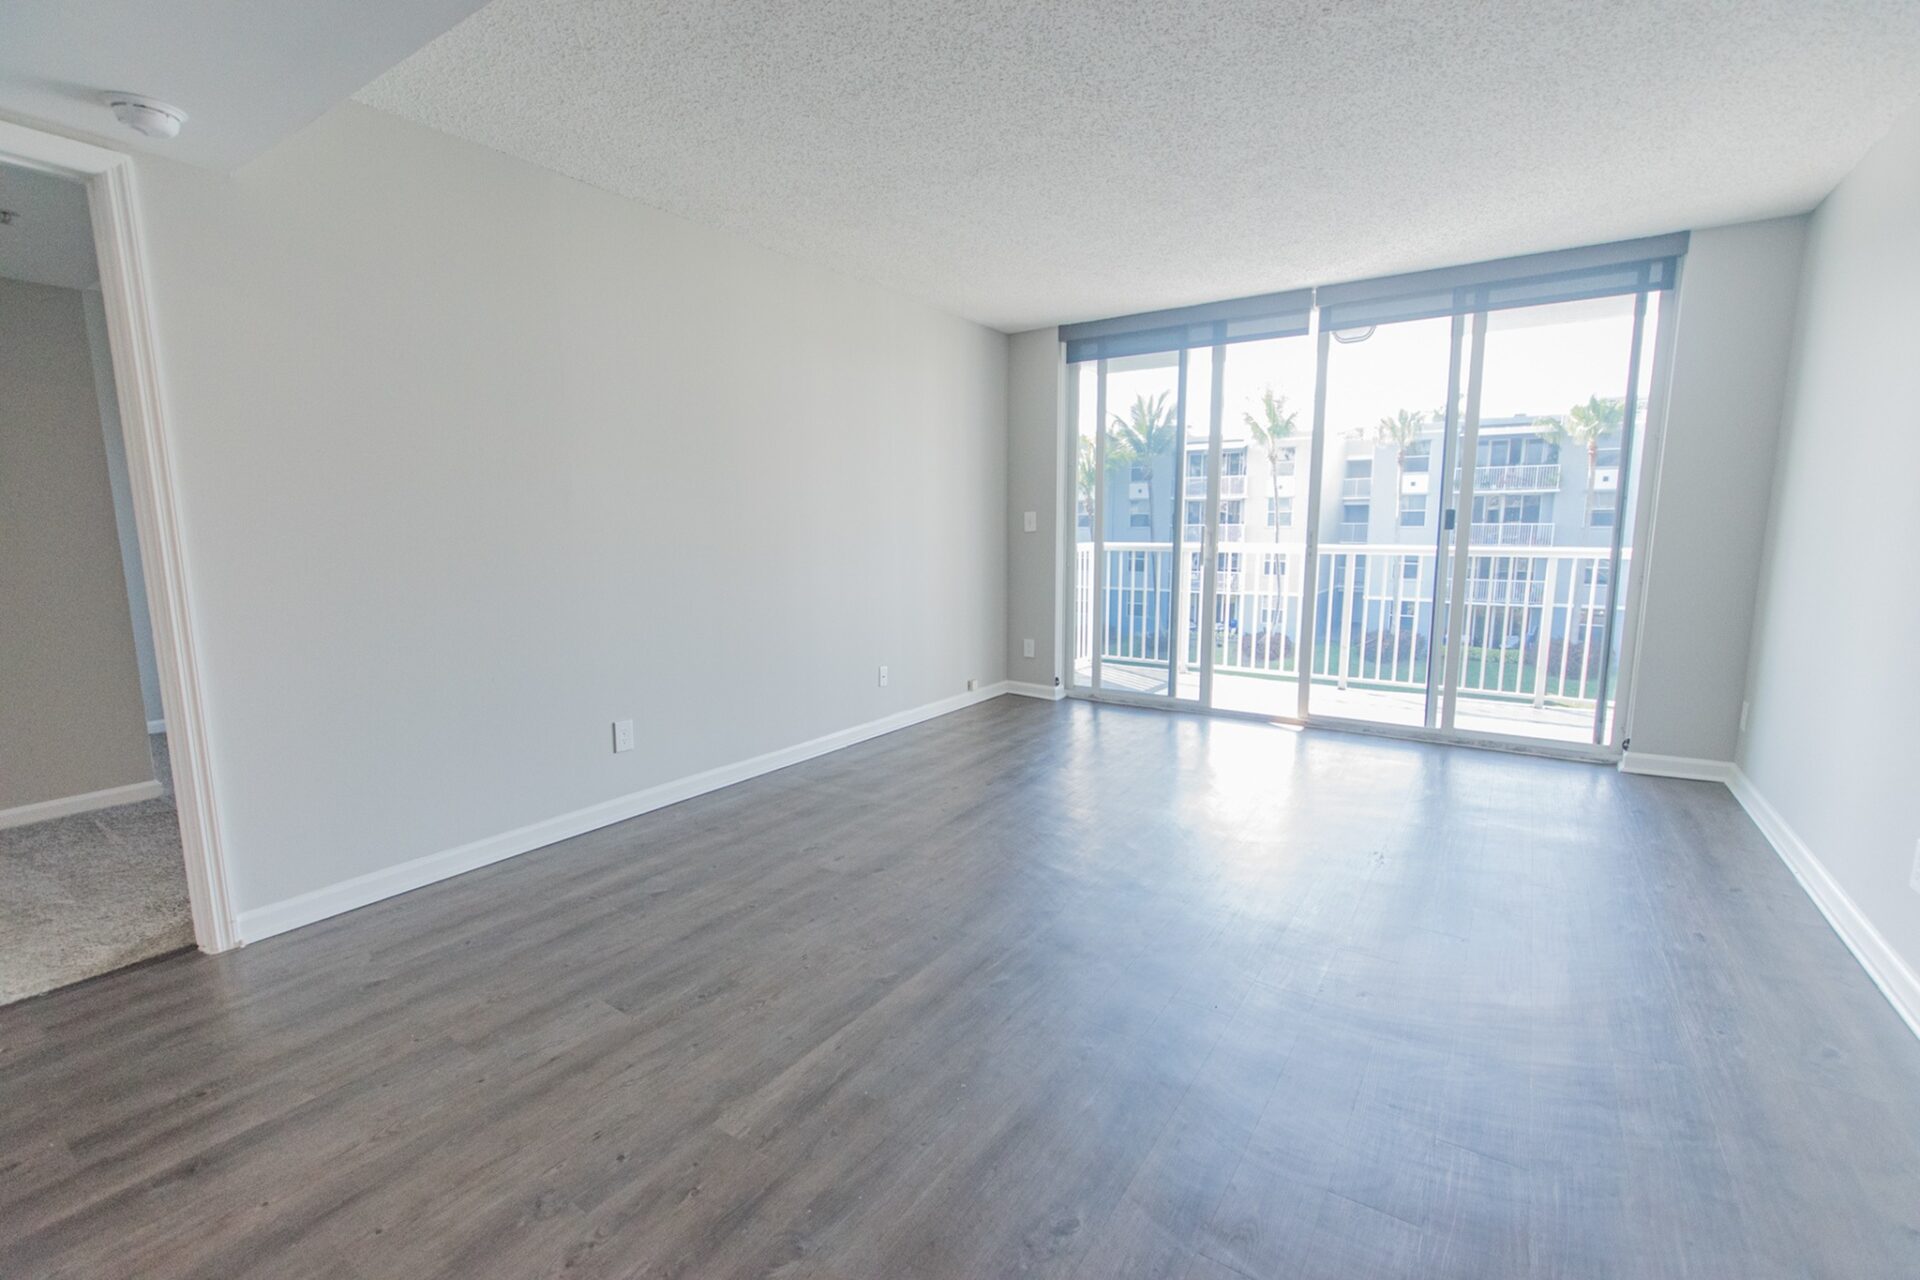 Spacious living space with sliding window doors leading to the balcony.